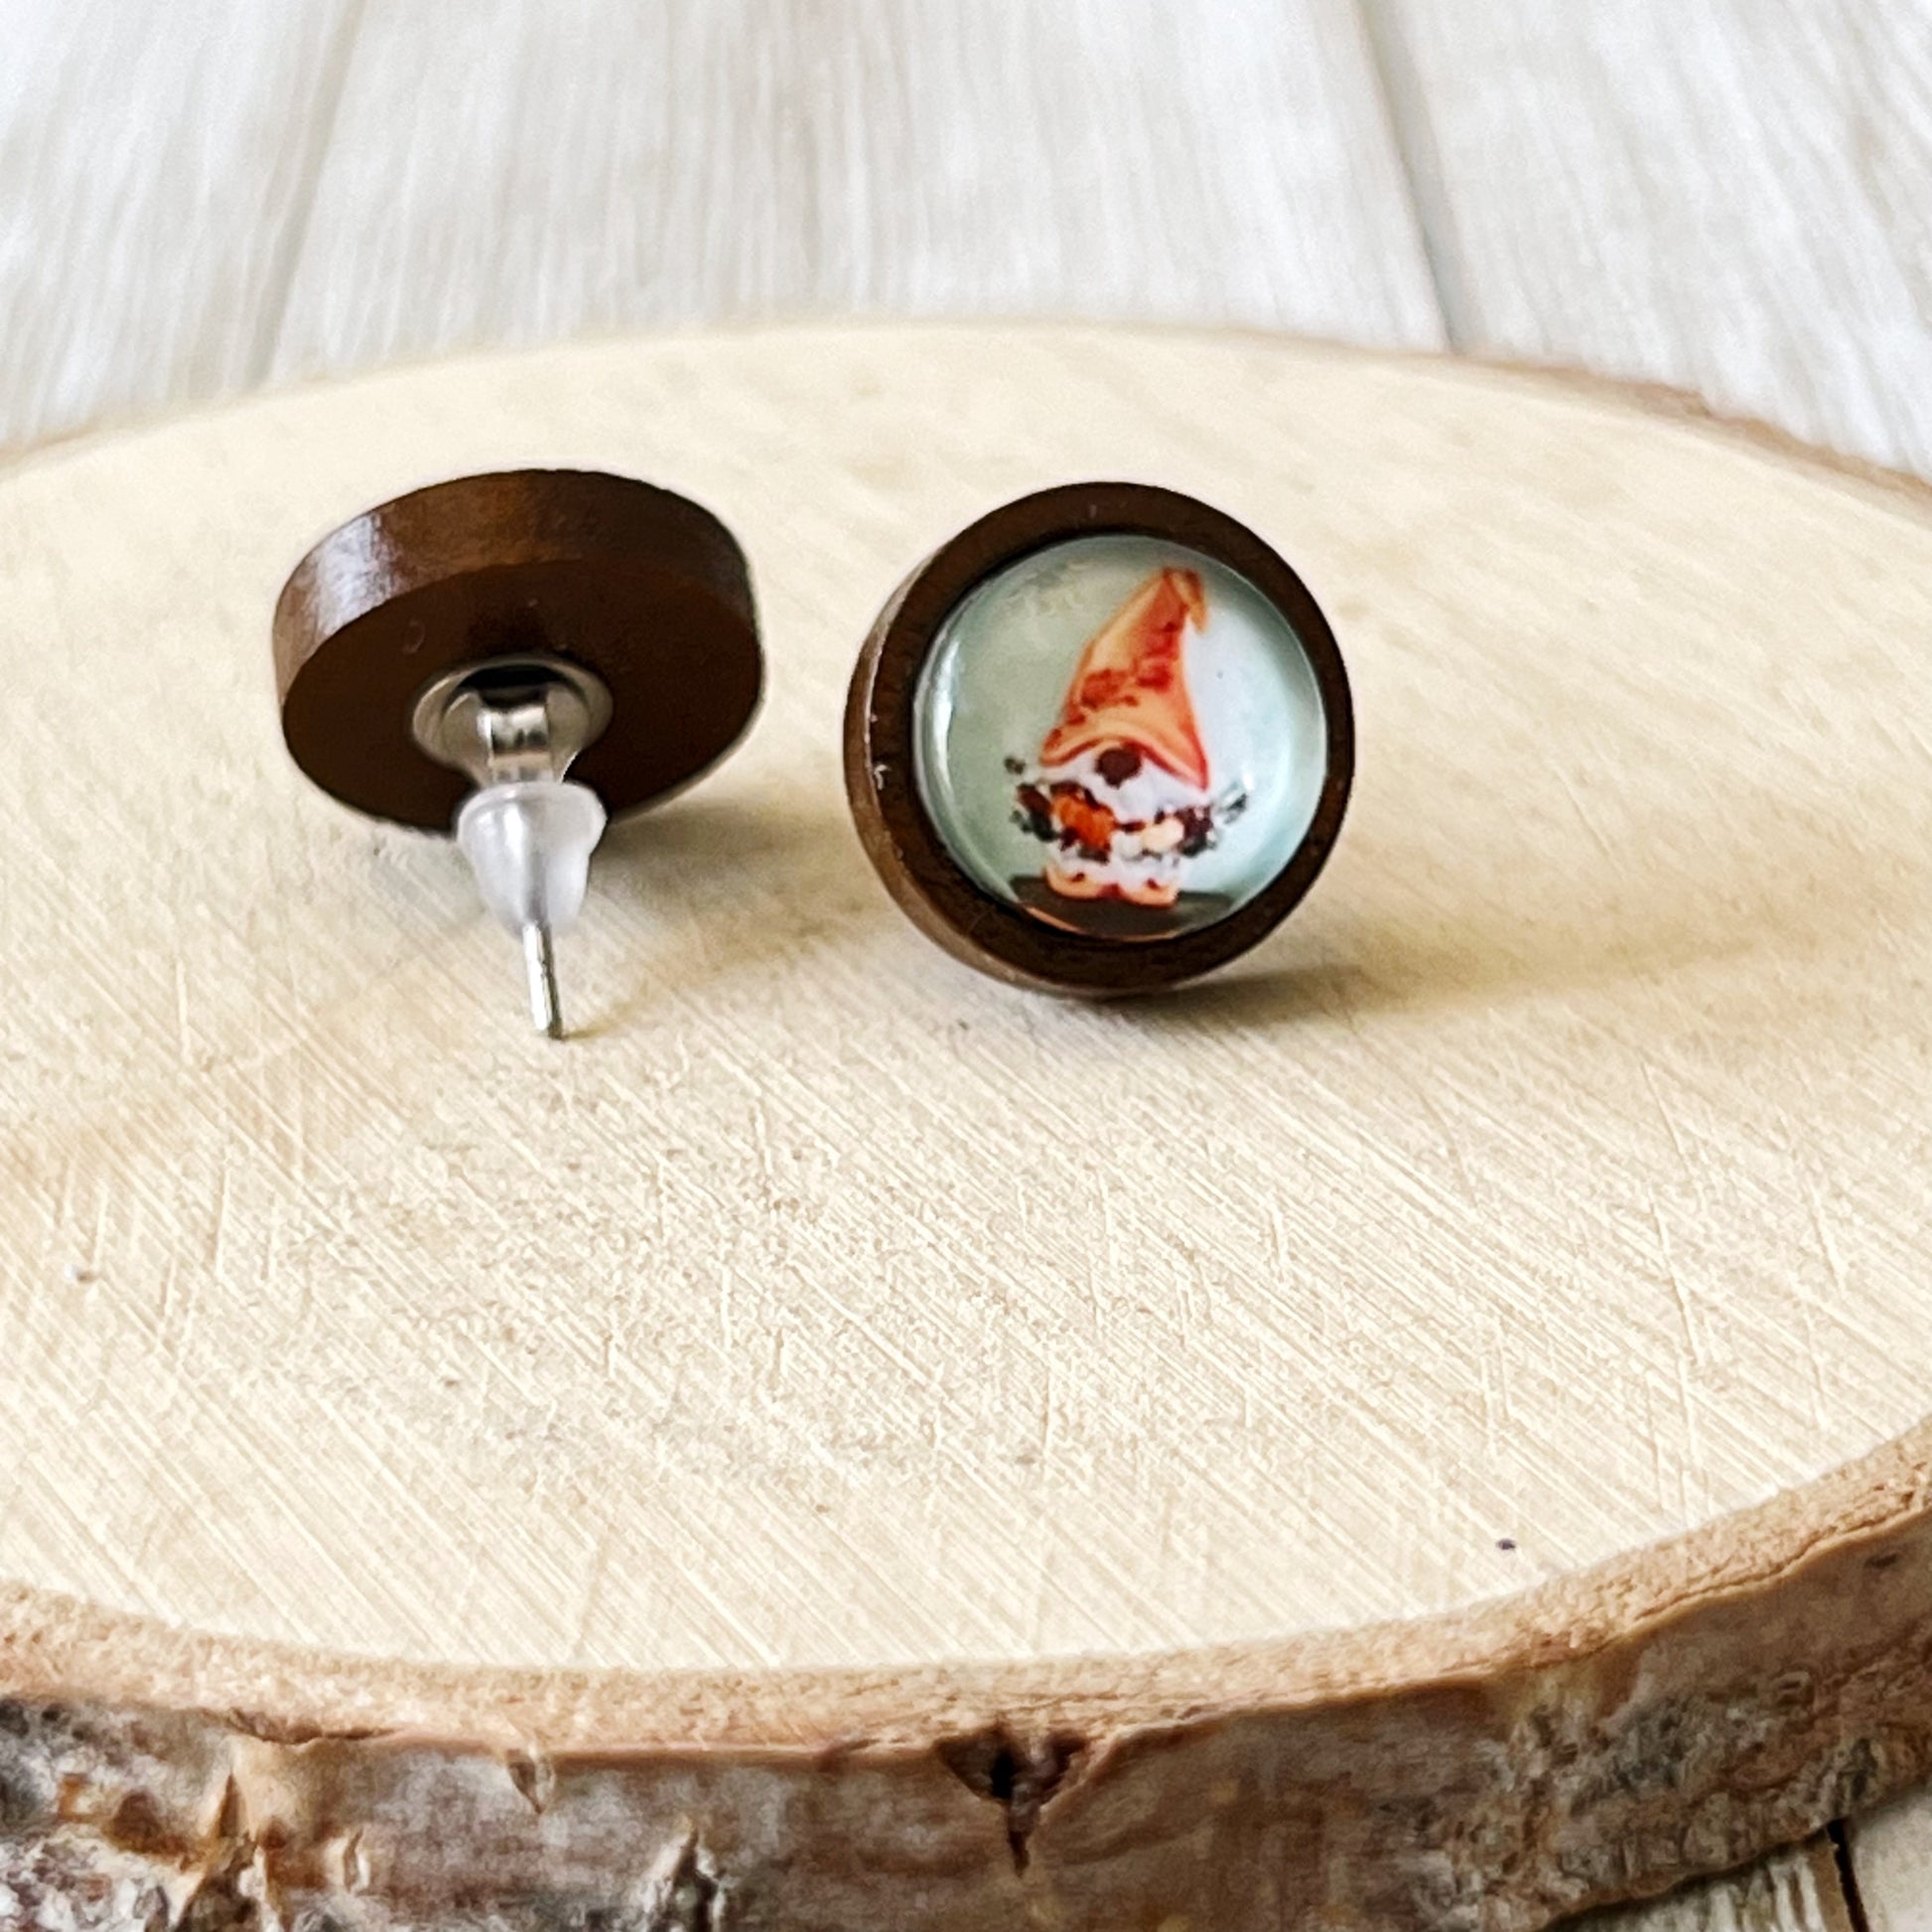 Fall Gnome Stainless Steel Wood Stud Earrings